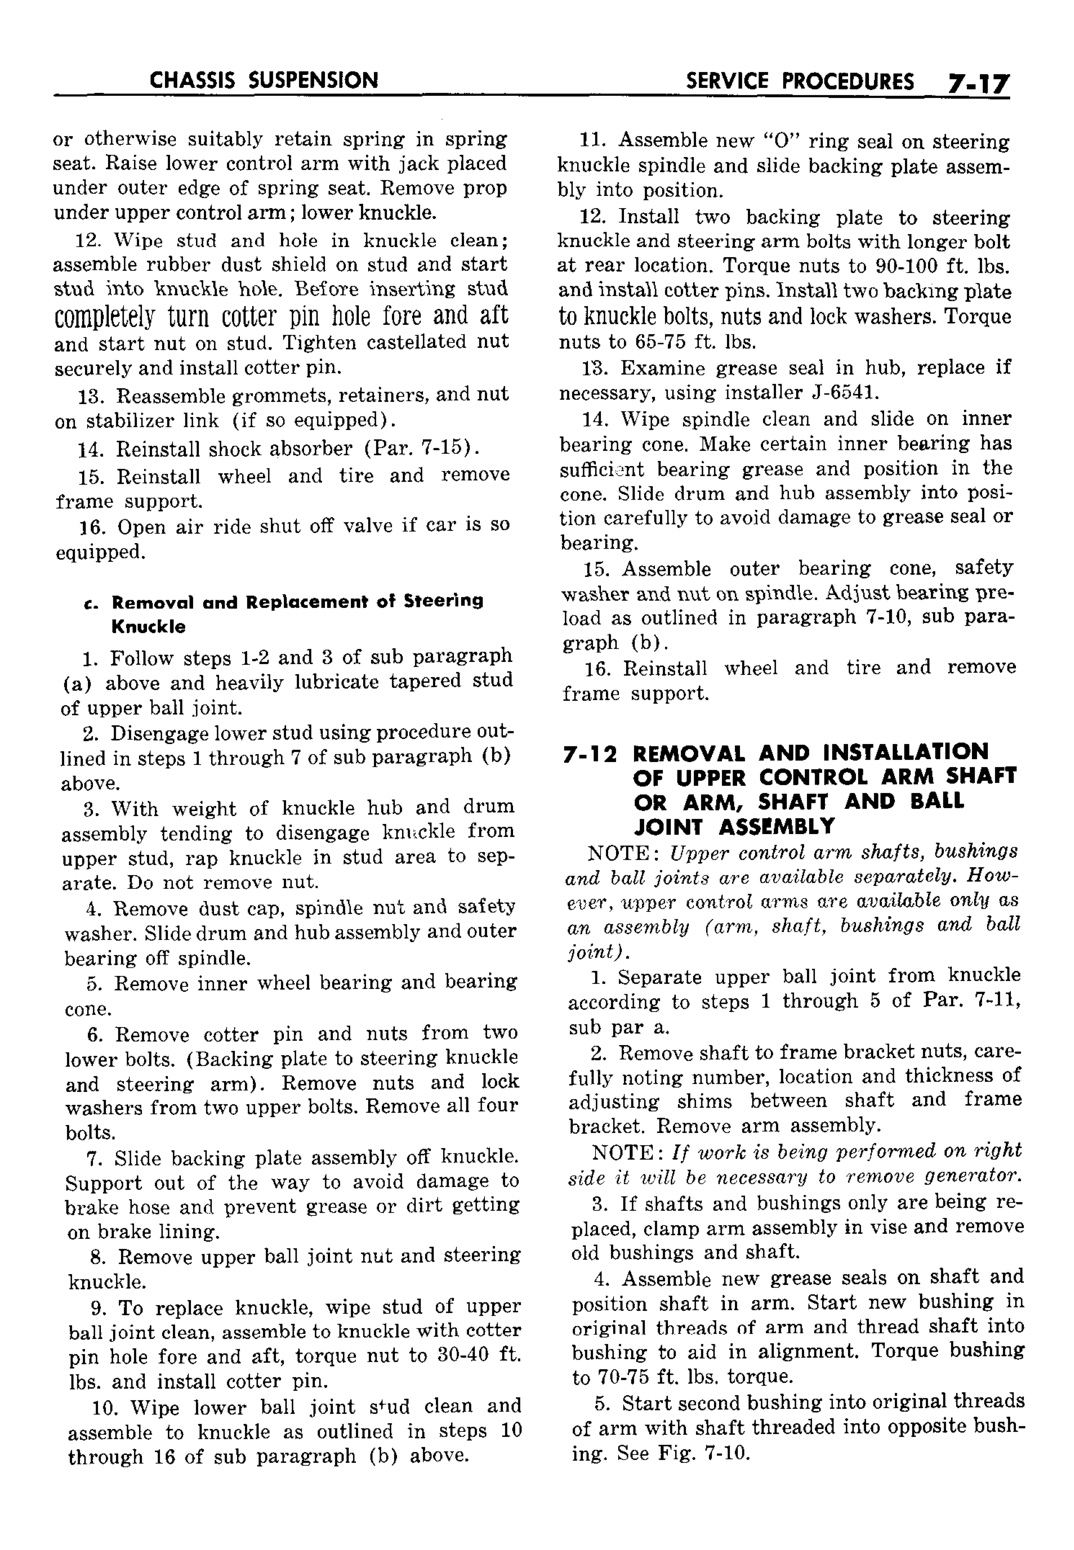 n_08 1959 Buick Shop Manual - Chassis Suspension-017-017.jpg